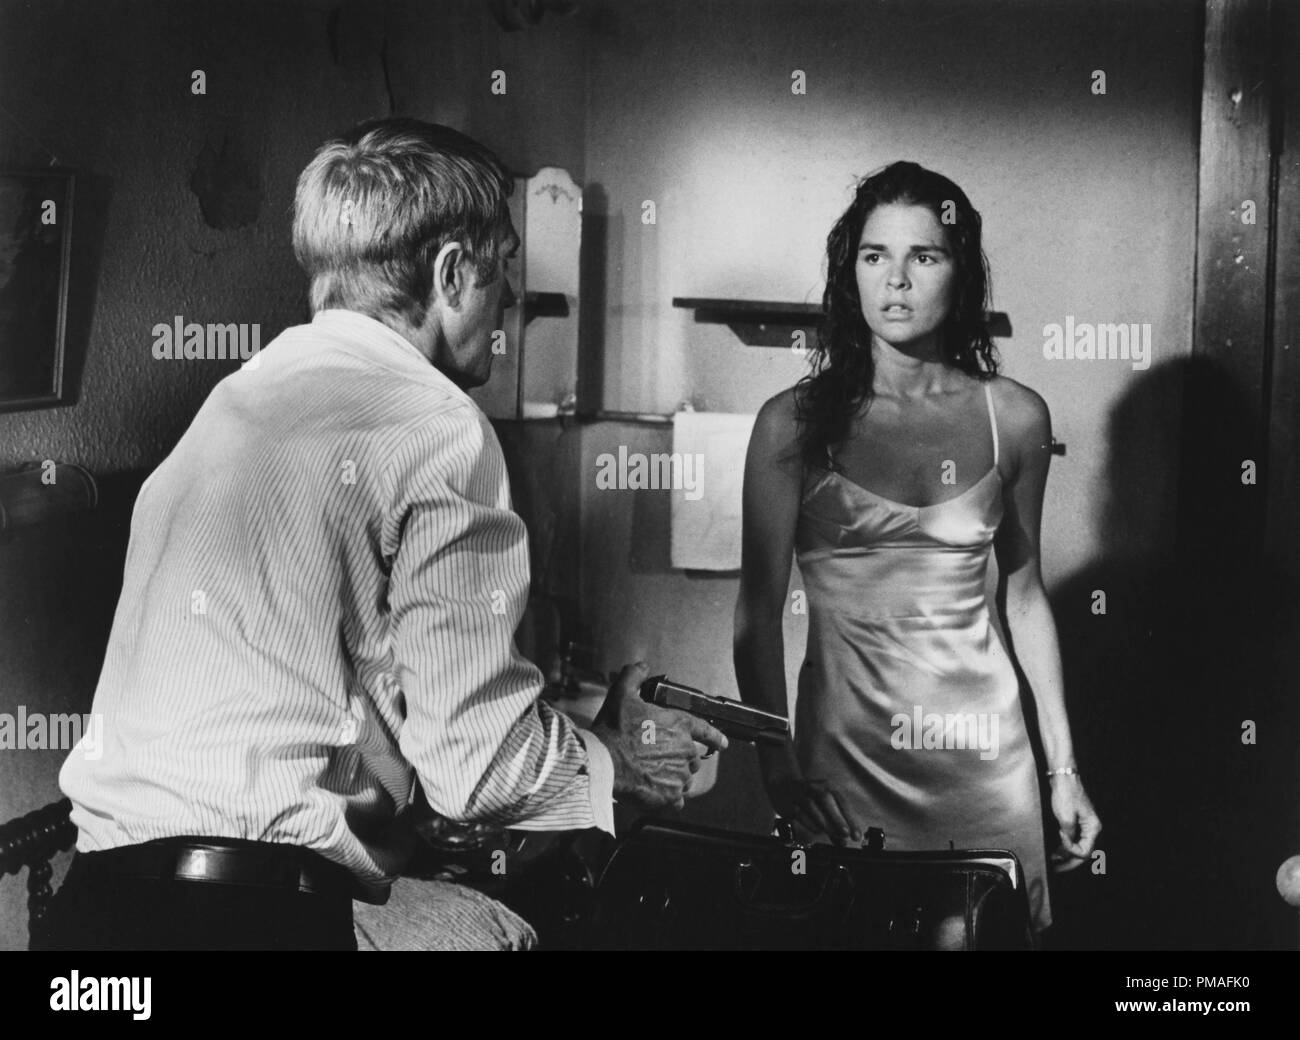 Steve McQueen and Ali MacGraw in 'The Getaway', 1972 National General Pictures  File Reference # 32633 664THA Stock Photo